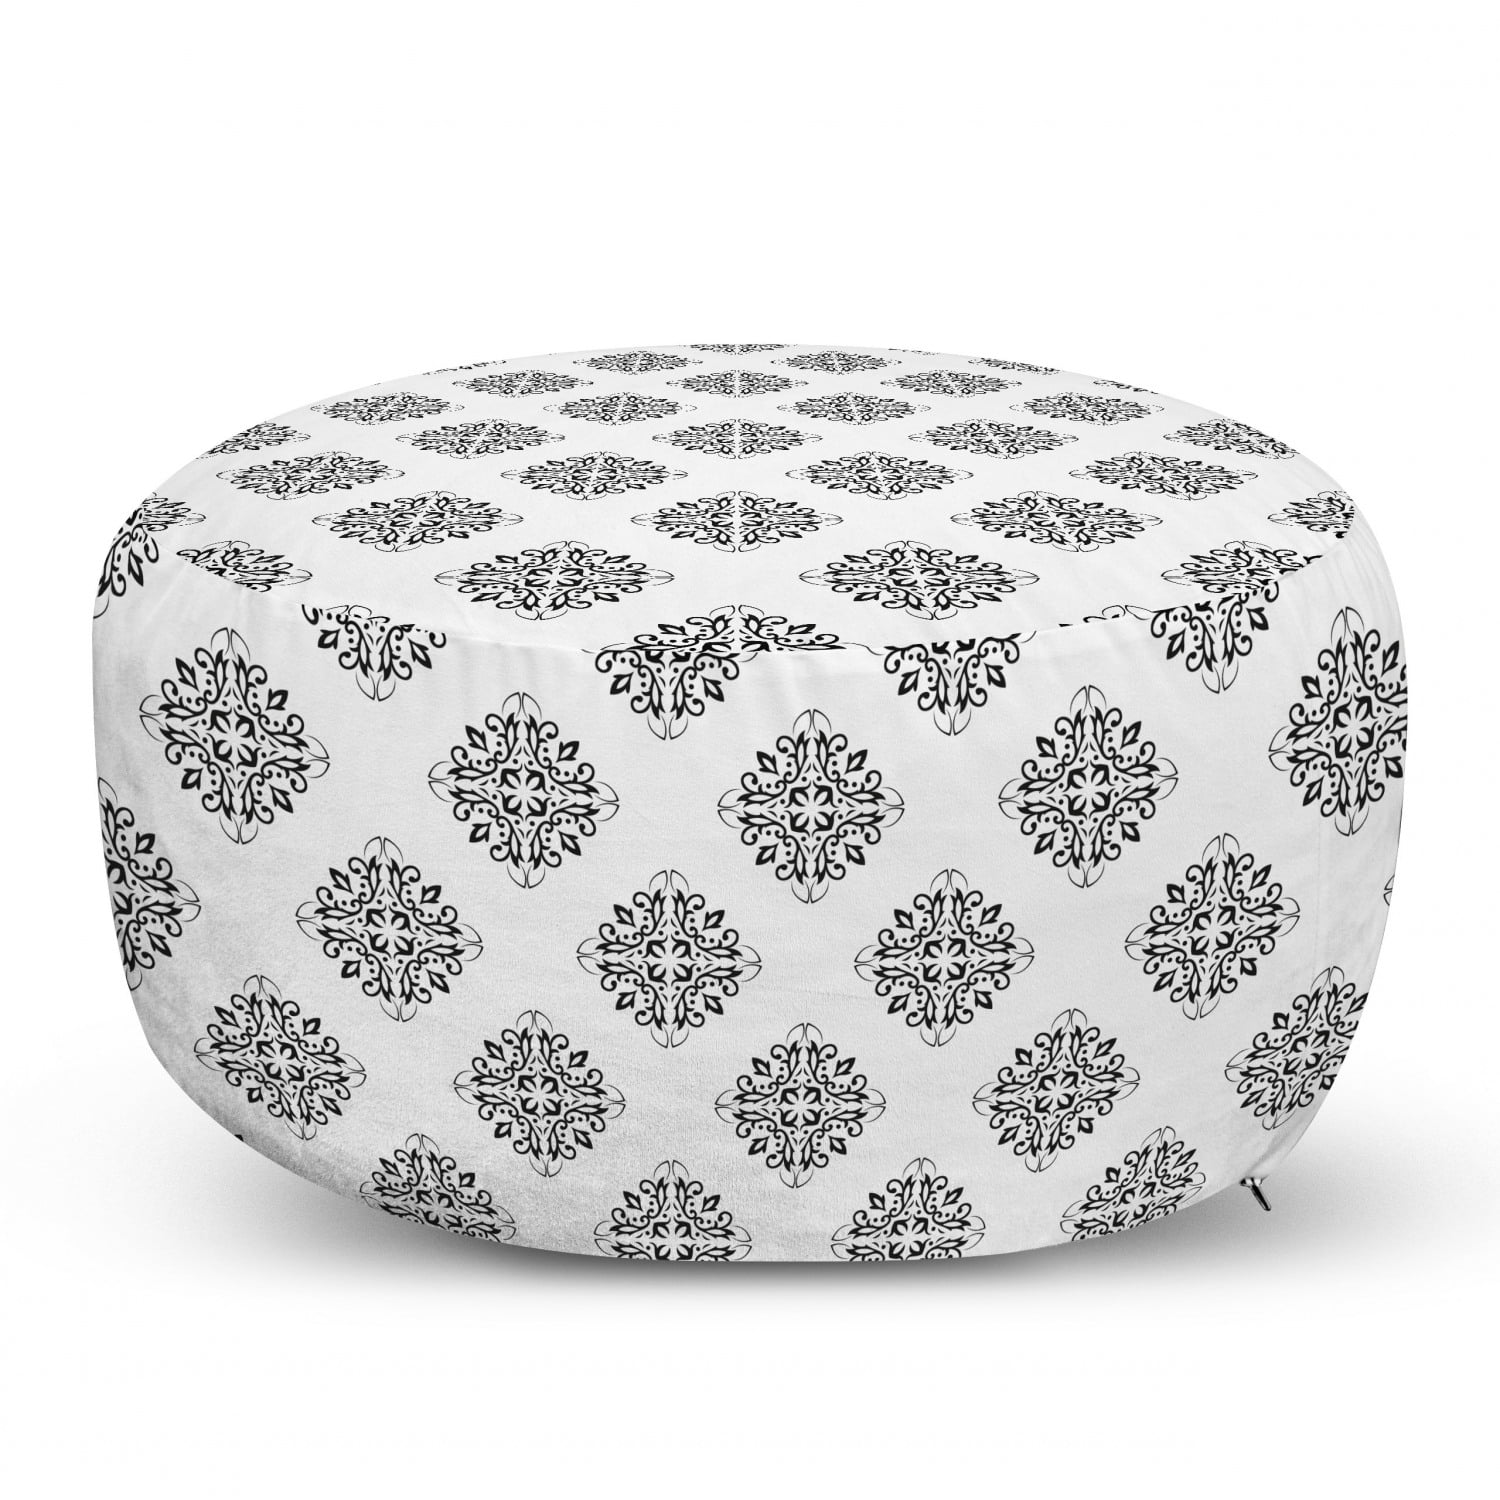 Snowflakes in Various Details and Designs Pastel Toned Repetition Under Desk Foot Stool for Living Room Office Ottoman with Cover Pale Pink and Dark Cocoa Ambesonne Winter Rectangle Pouf 25 